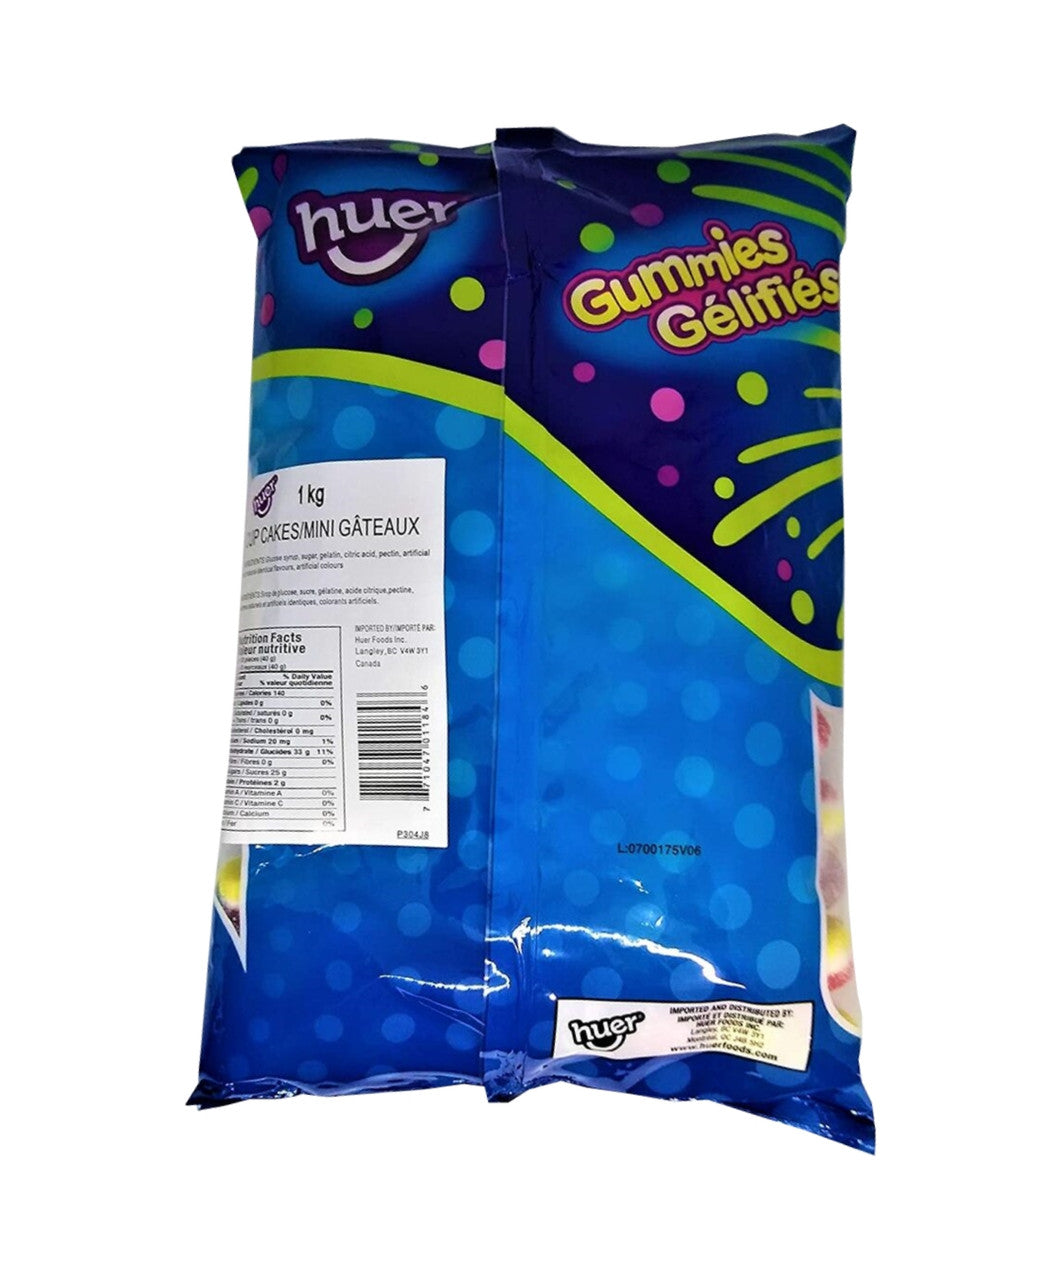 Huer Gummy Candy Cup Cakes, 1kg/2.2lb. Bag {Imported from Canada}